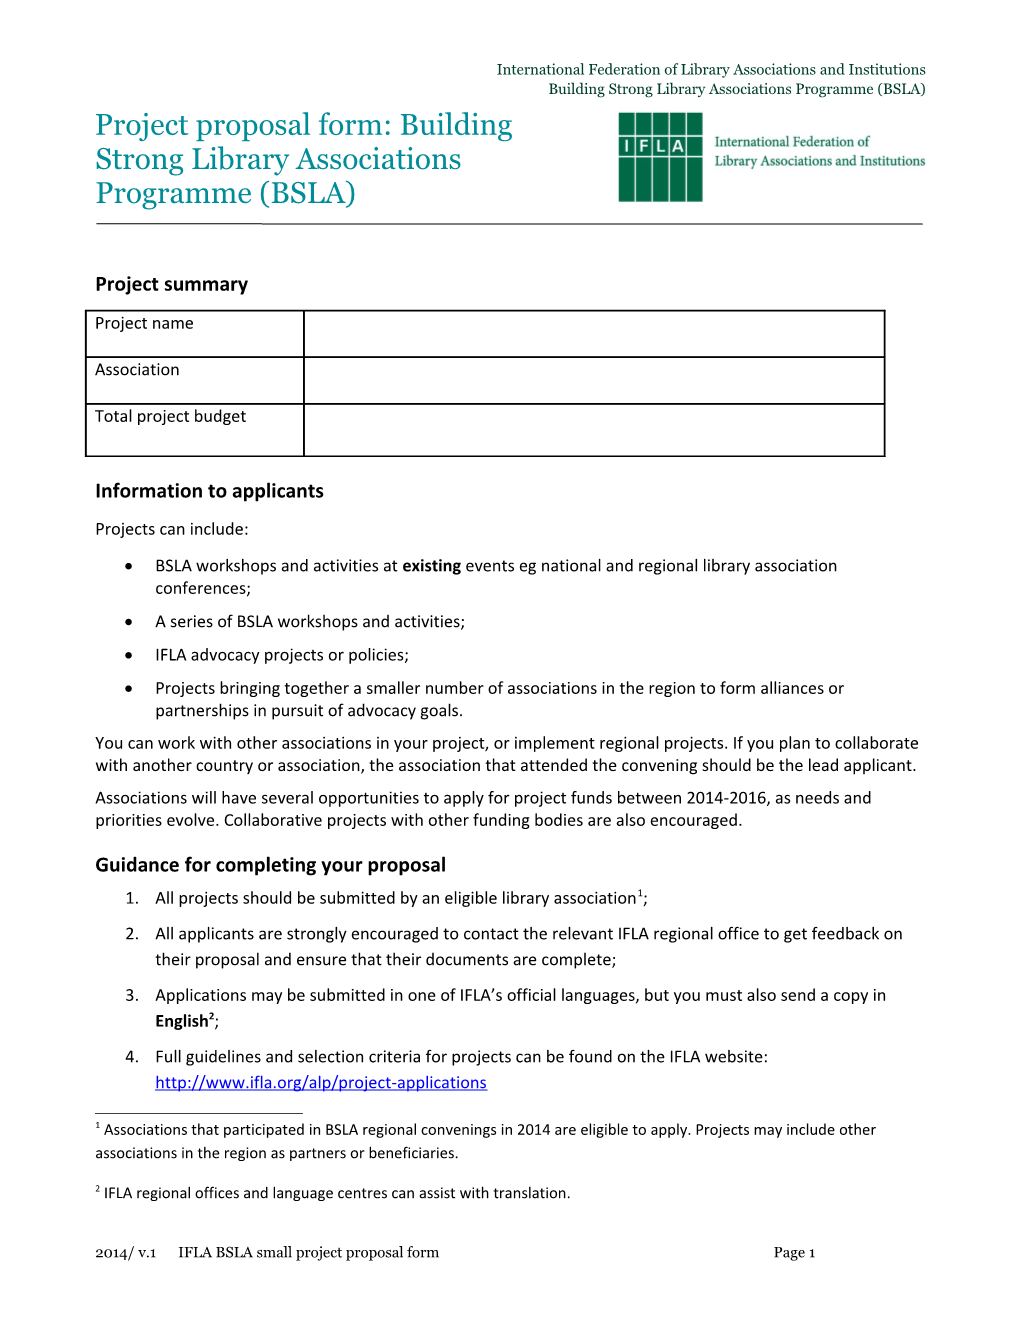 Project Proposal Form: Building Strong Library Associations Programme (BSLA)